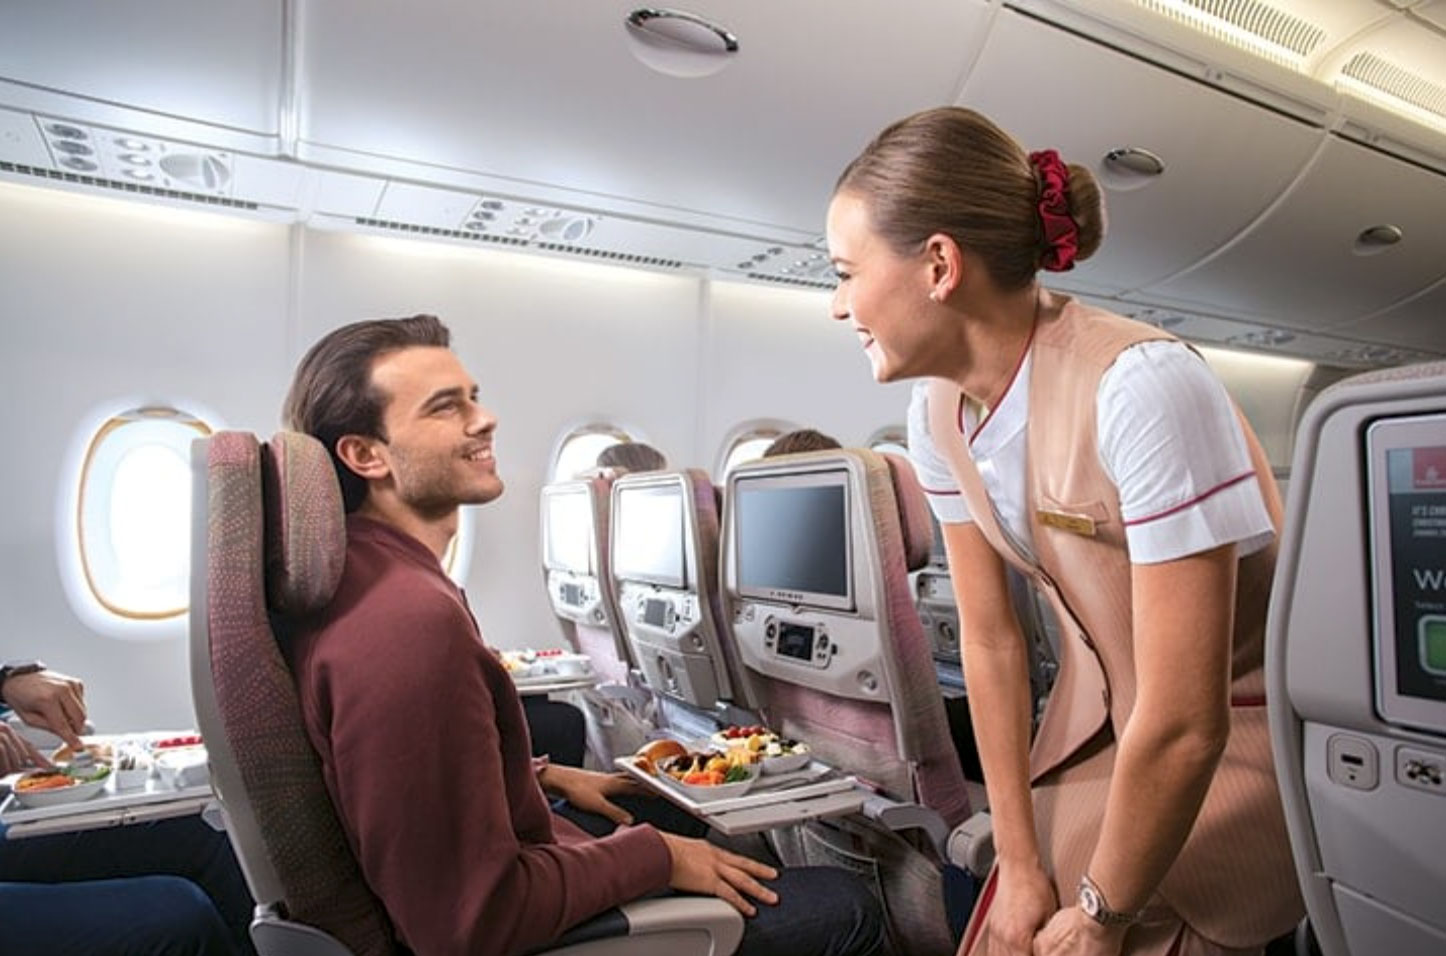 a woman smiling at a man sitting in an airplane